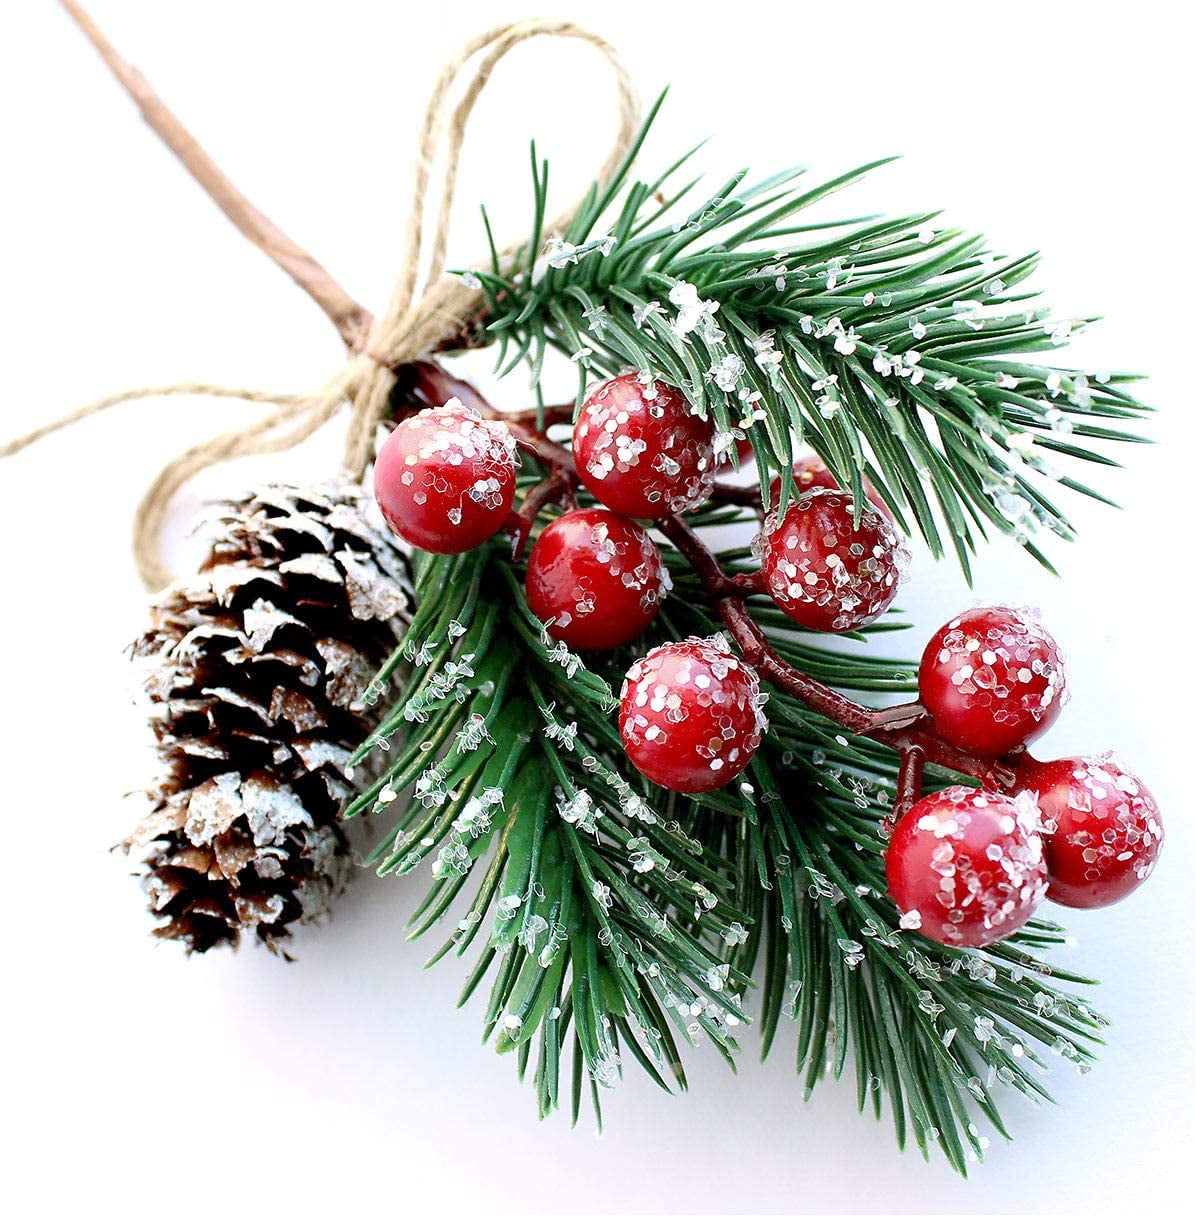 Red Berry Stems Pine Branches Evergreen Christmas Berries Decor 8 PCS Z6M5